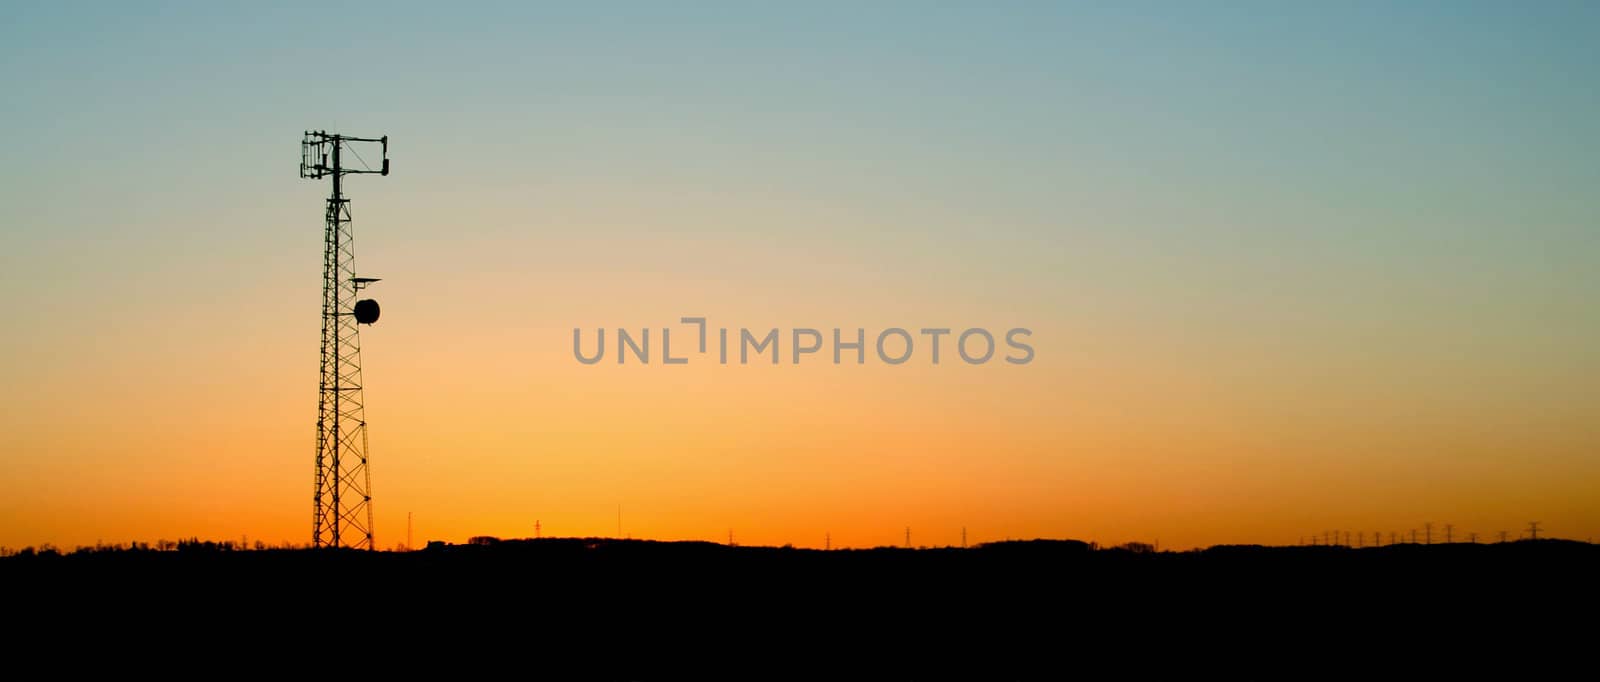 Pale Blue Cell Phone Tower Sunset
 by ca2hill